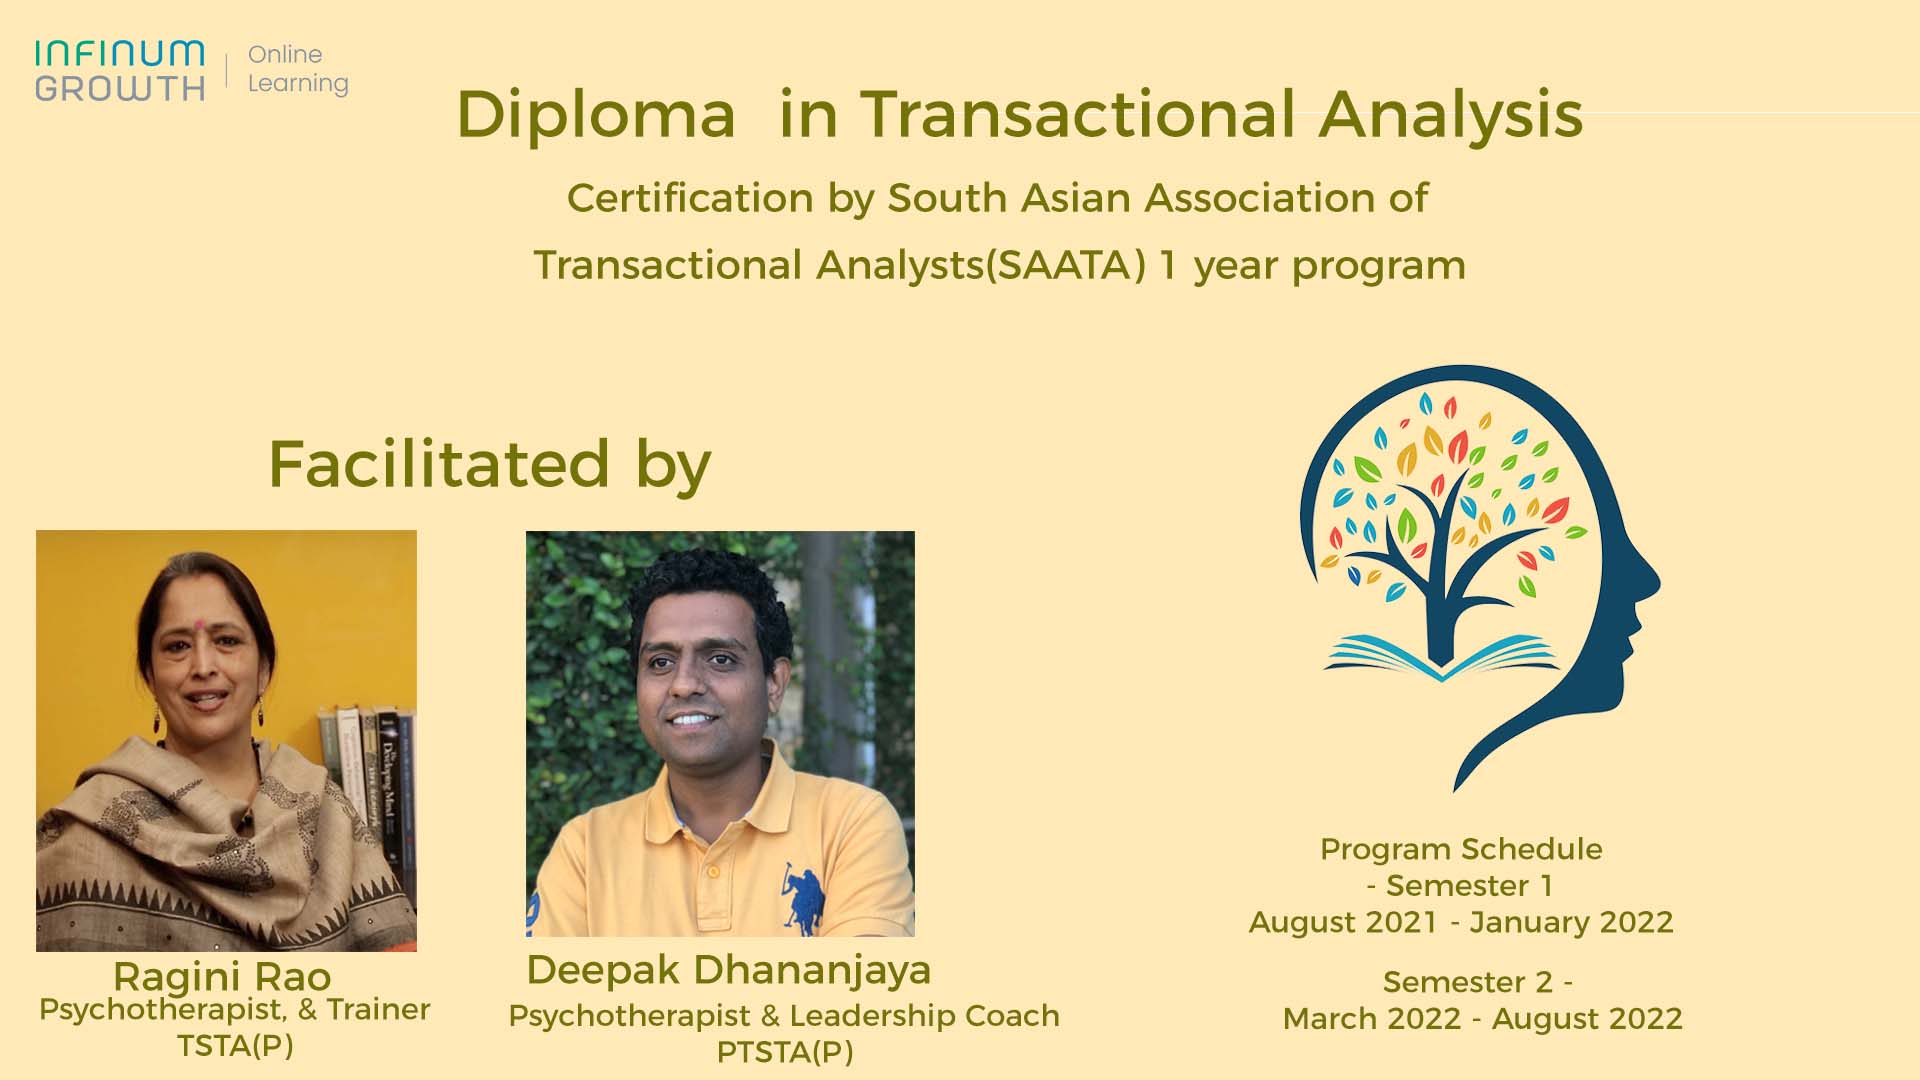 Diploma Course in Transactional Analysis – Certificate from SAATA